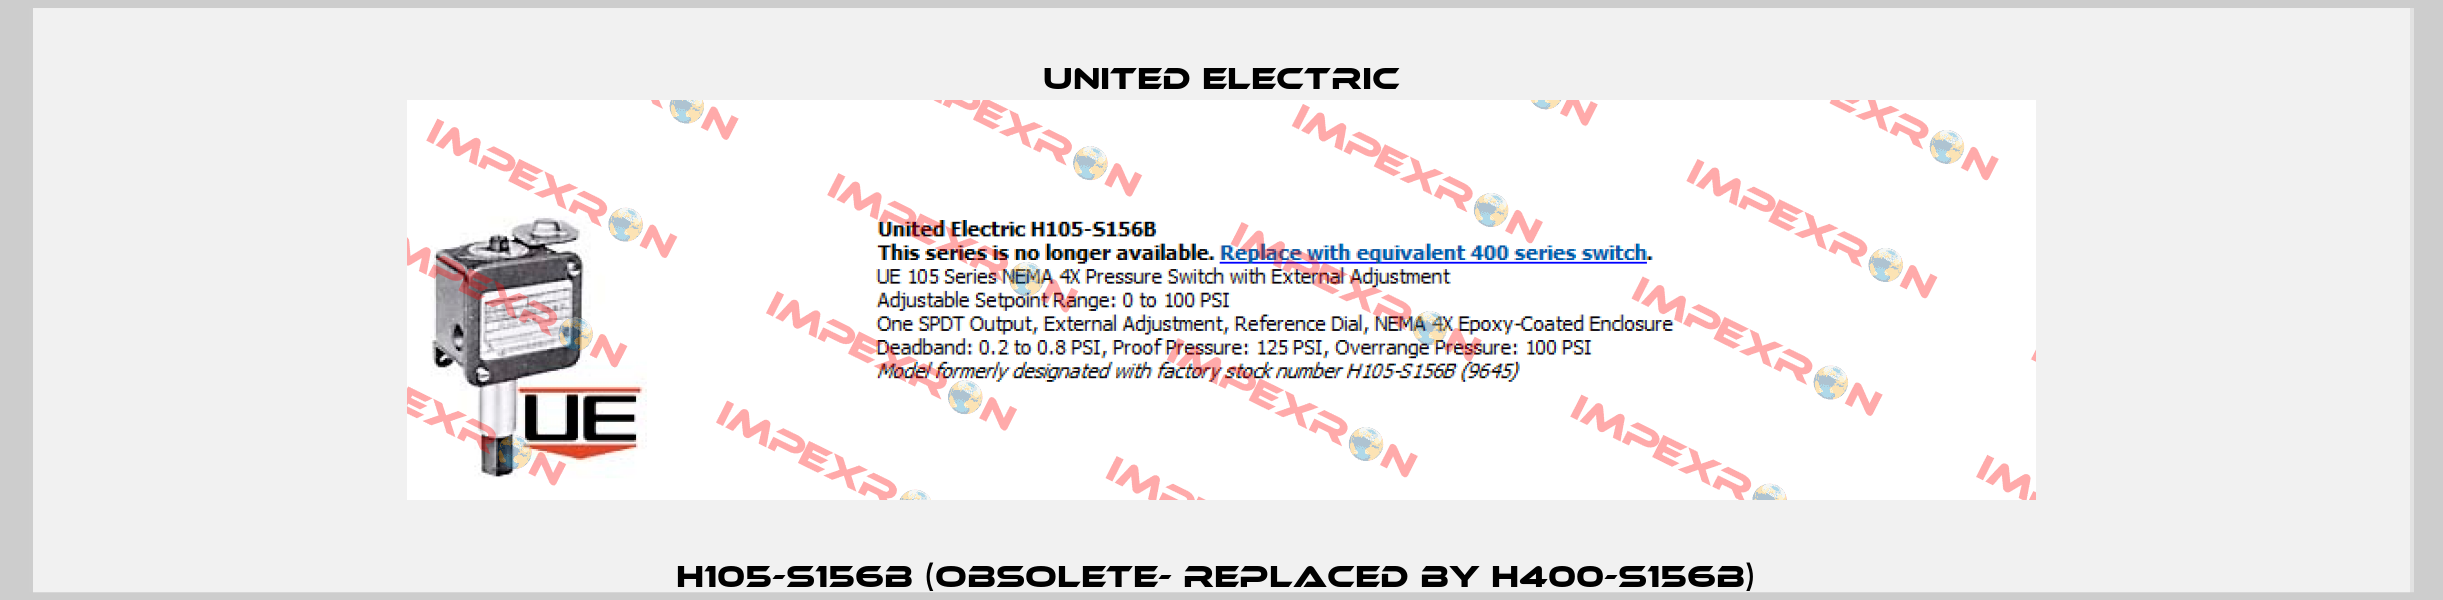 H105-S156B (obsolete- replaced by H400-S156B)  United Electric